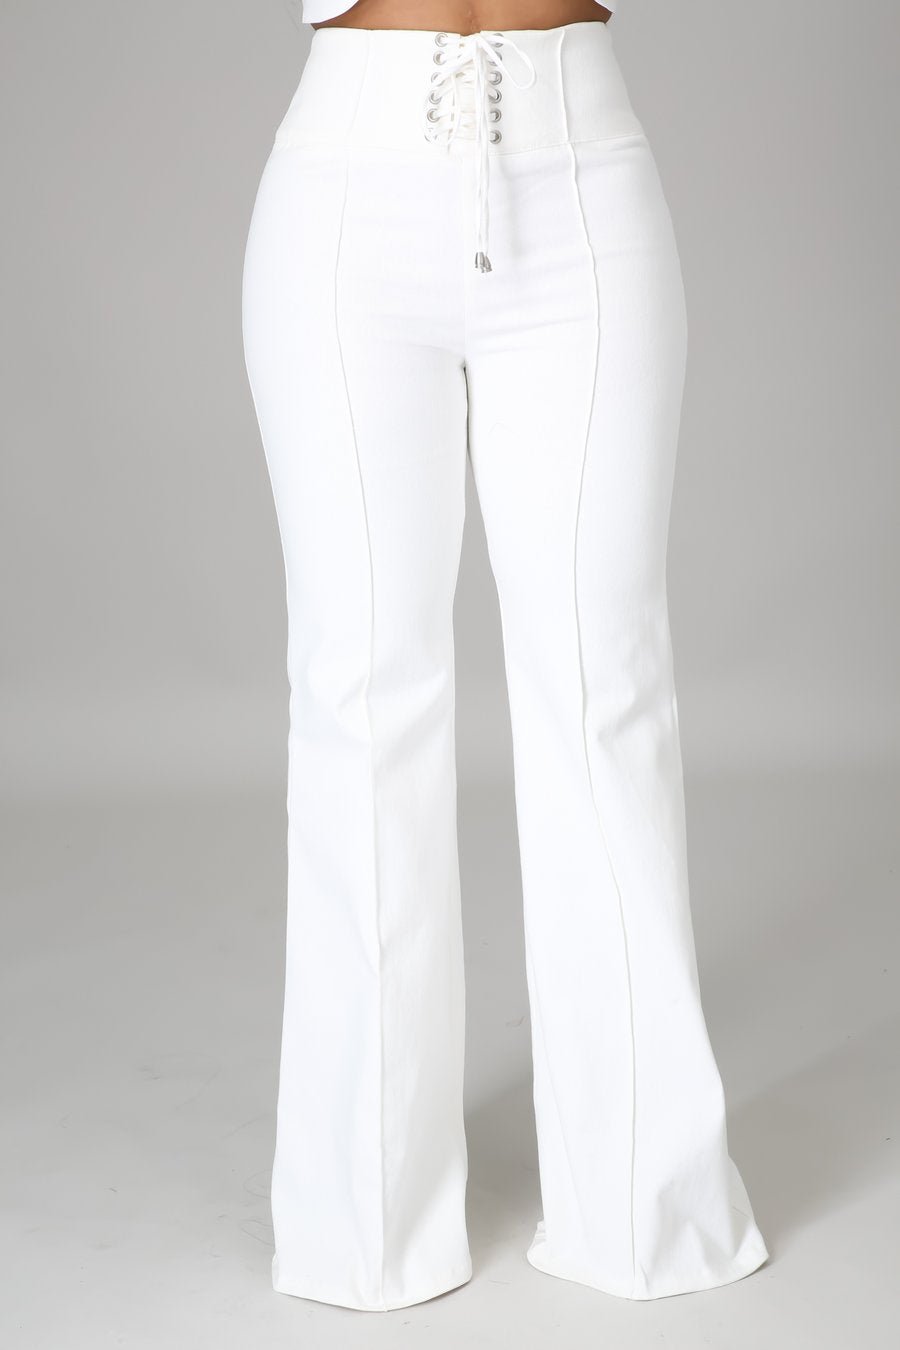 All White Laced Up Jeans - Ali’s Couture 